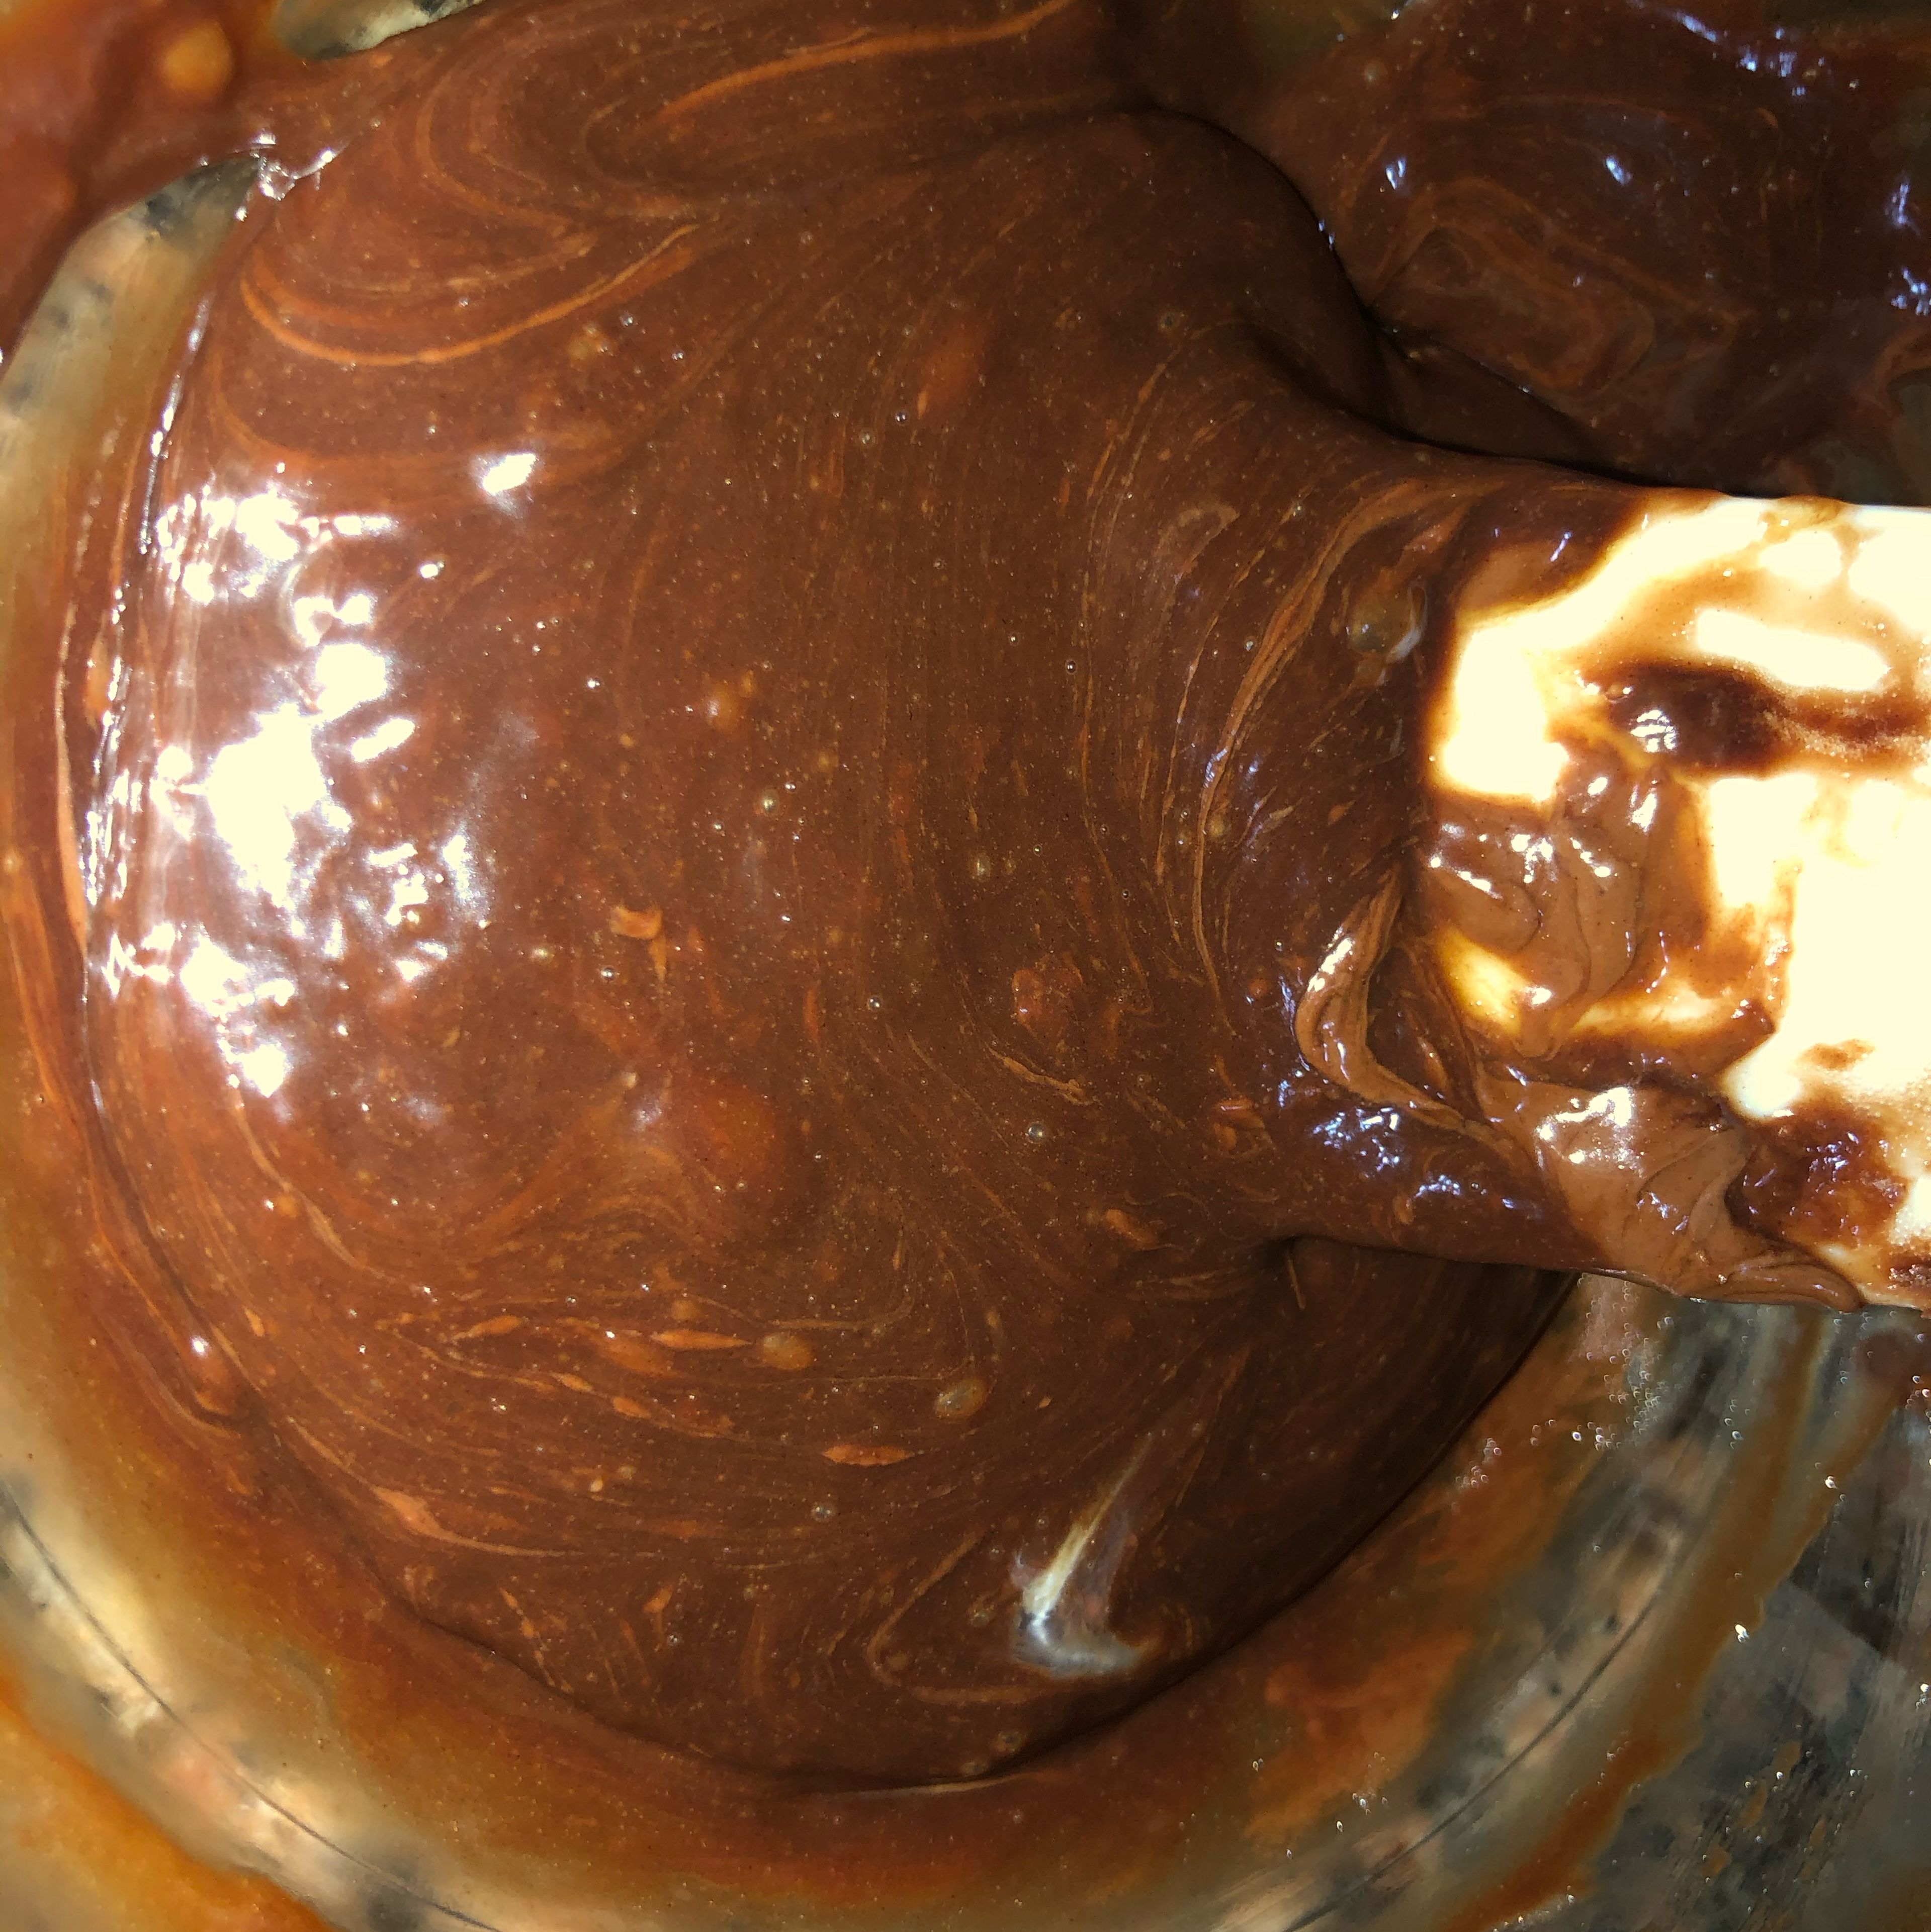 In a medium bowl, mix Nutella ( 1/2 cup )and two egg yolks.